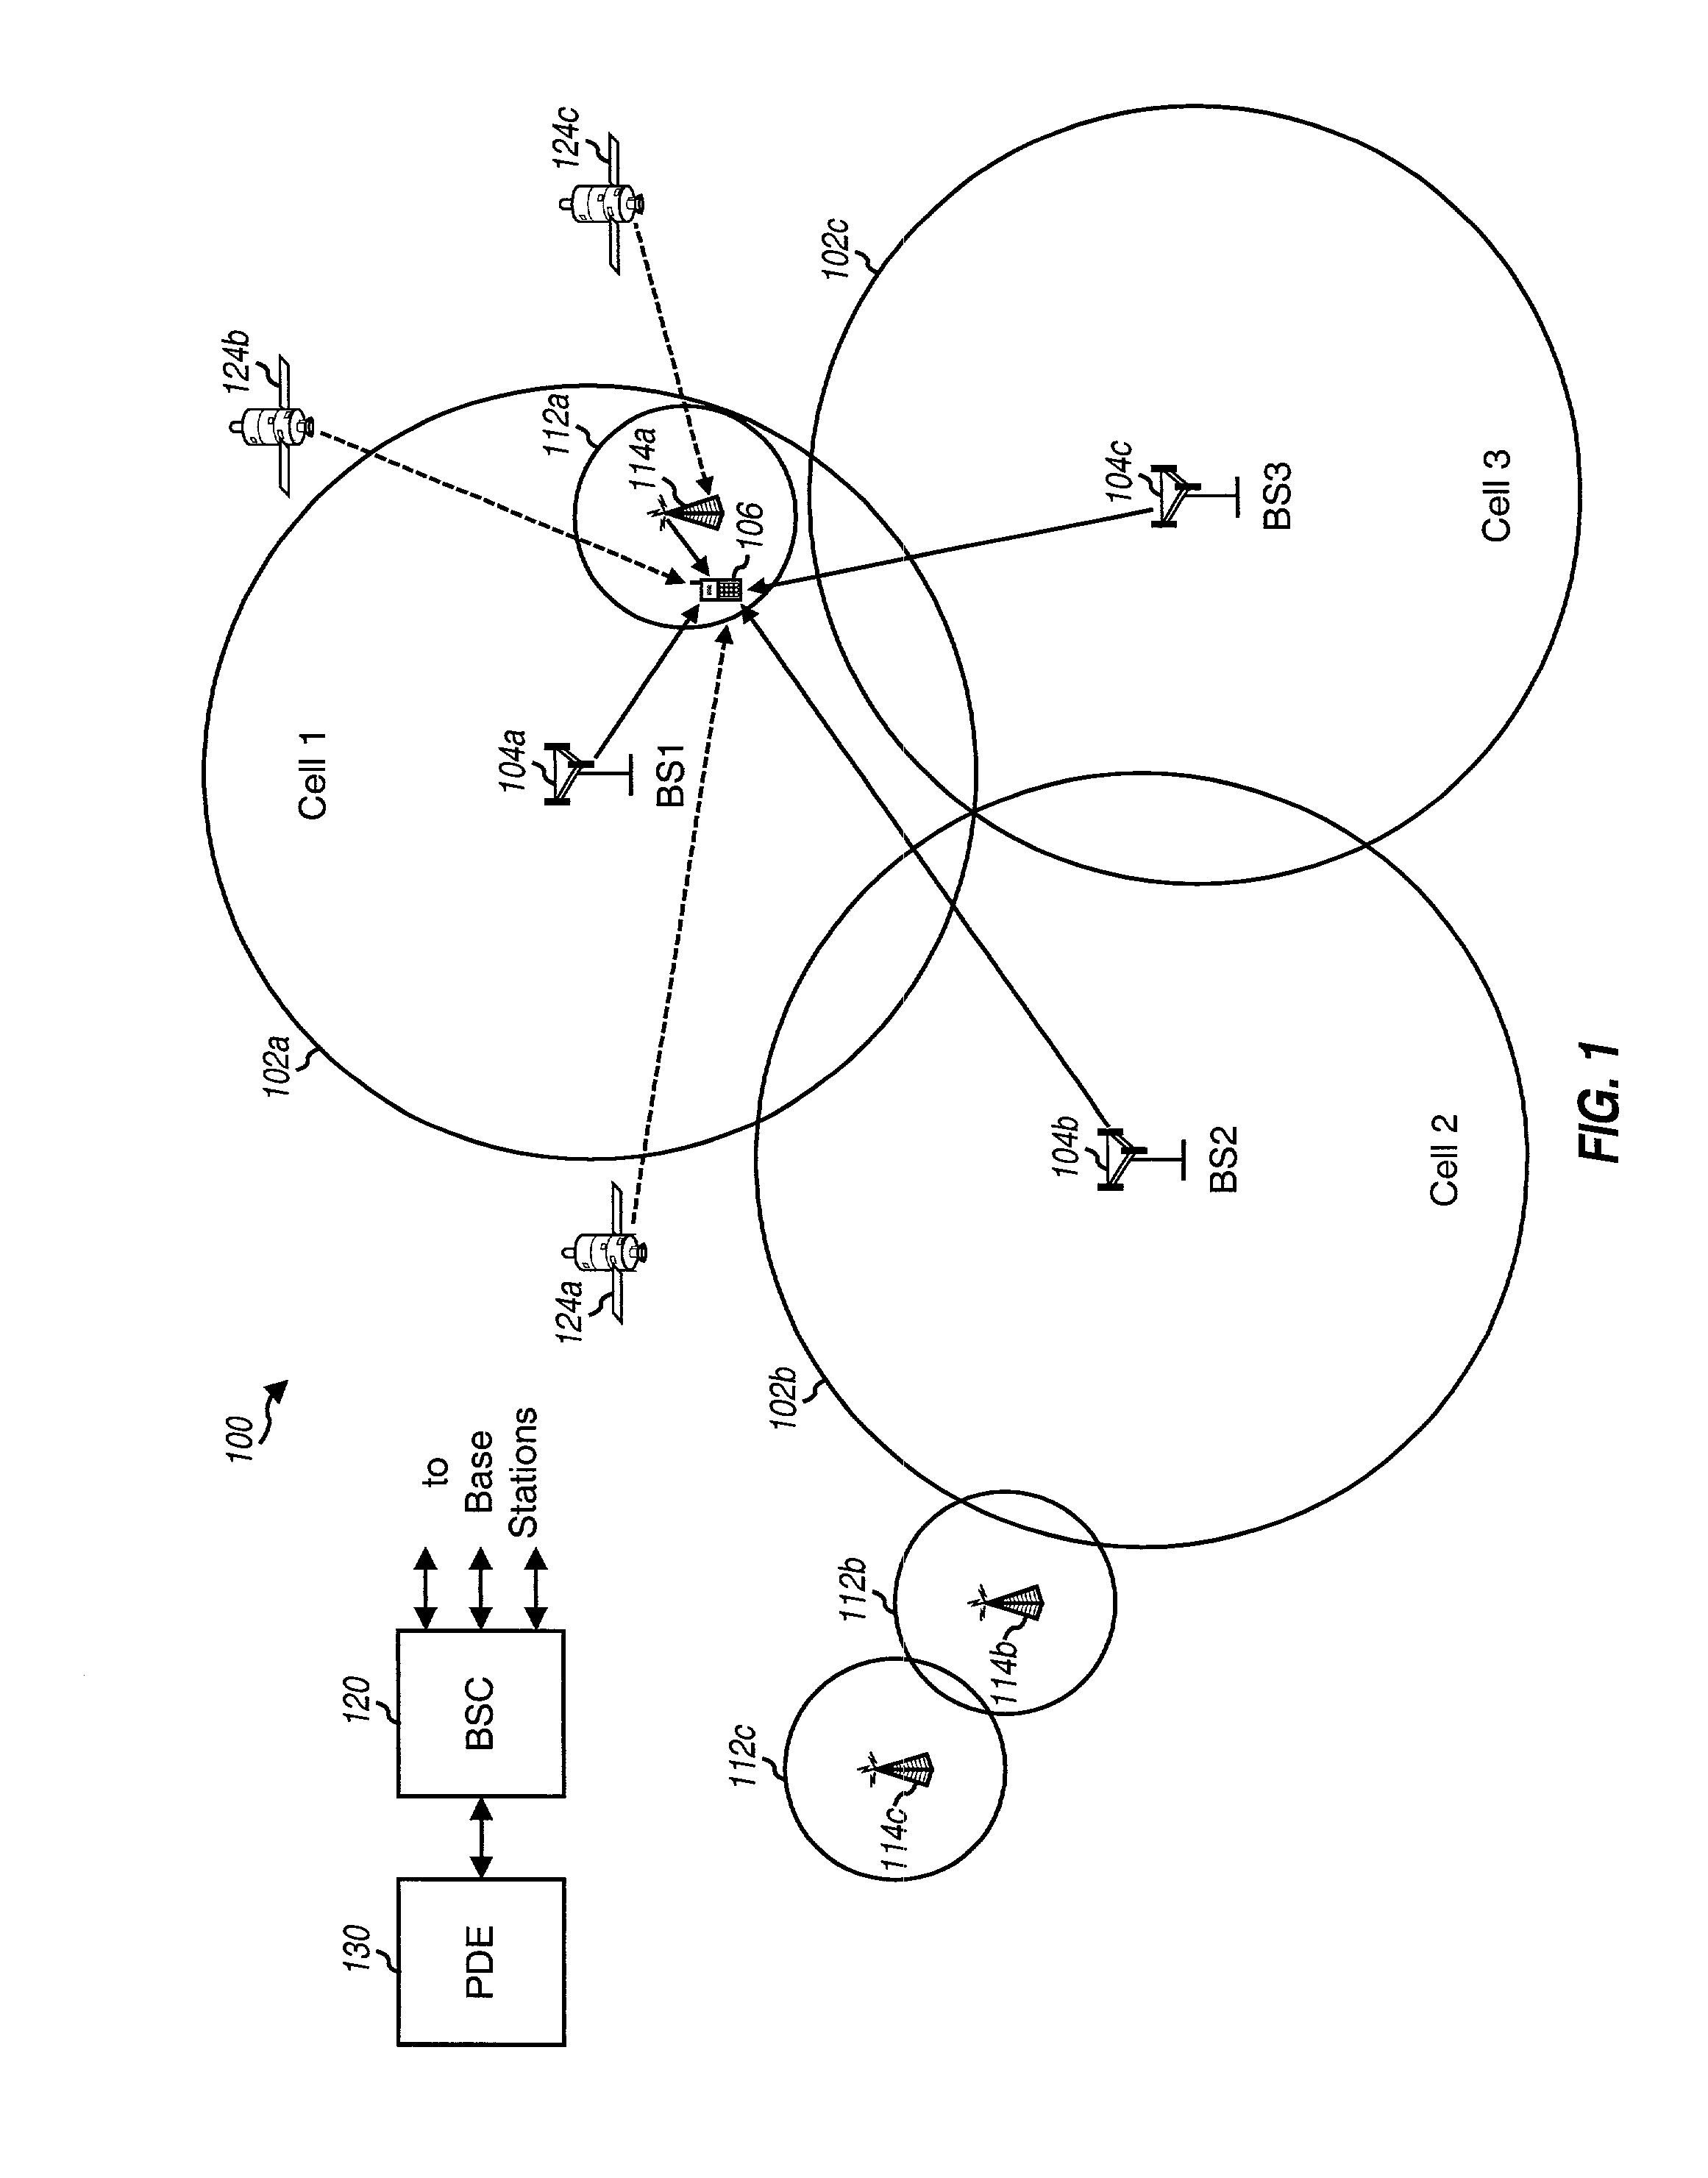 Position determination in a wireless communication system with detection and compensation for repeaters